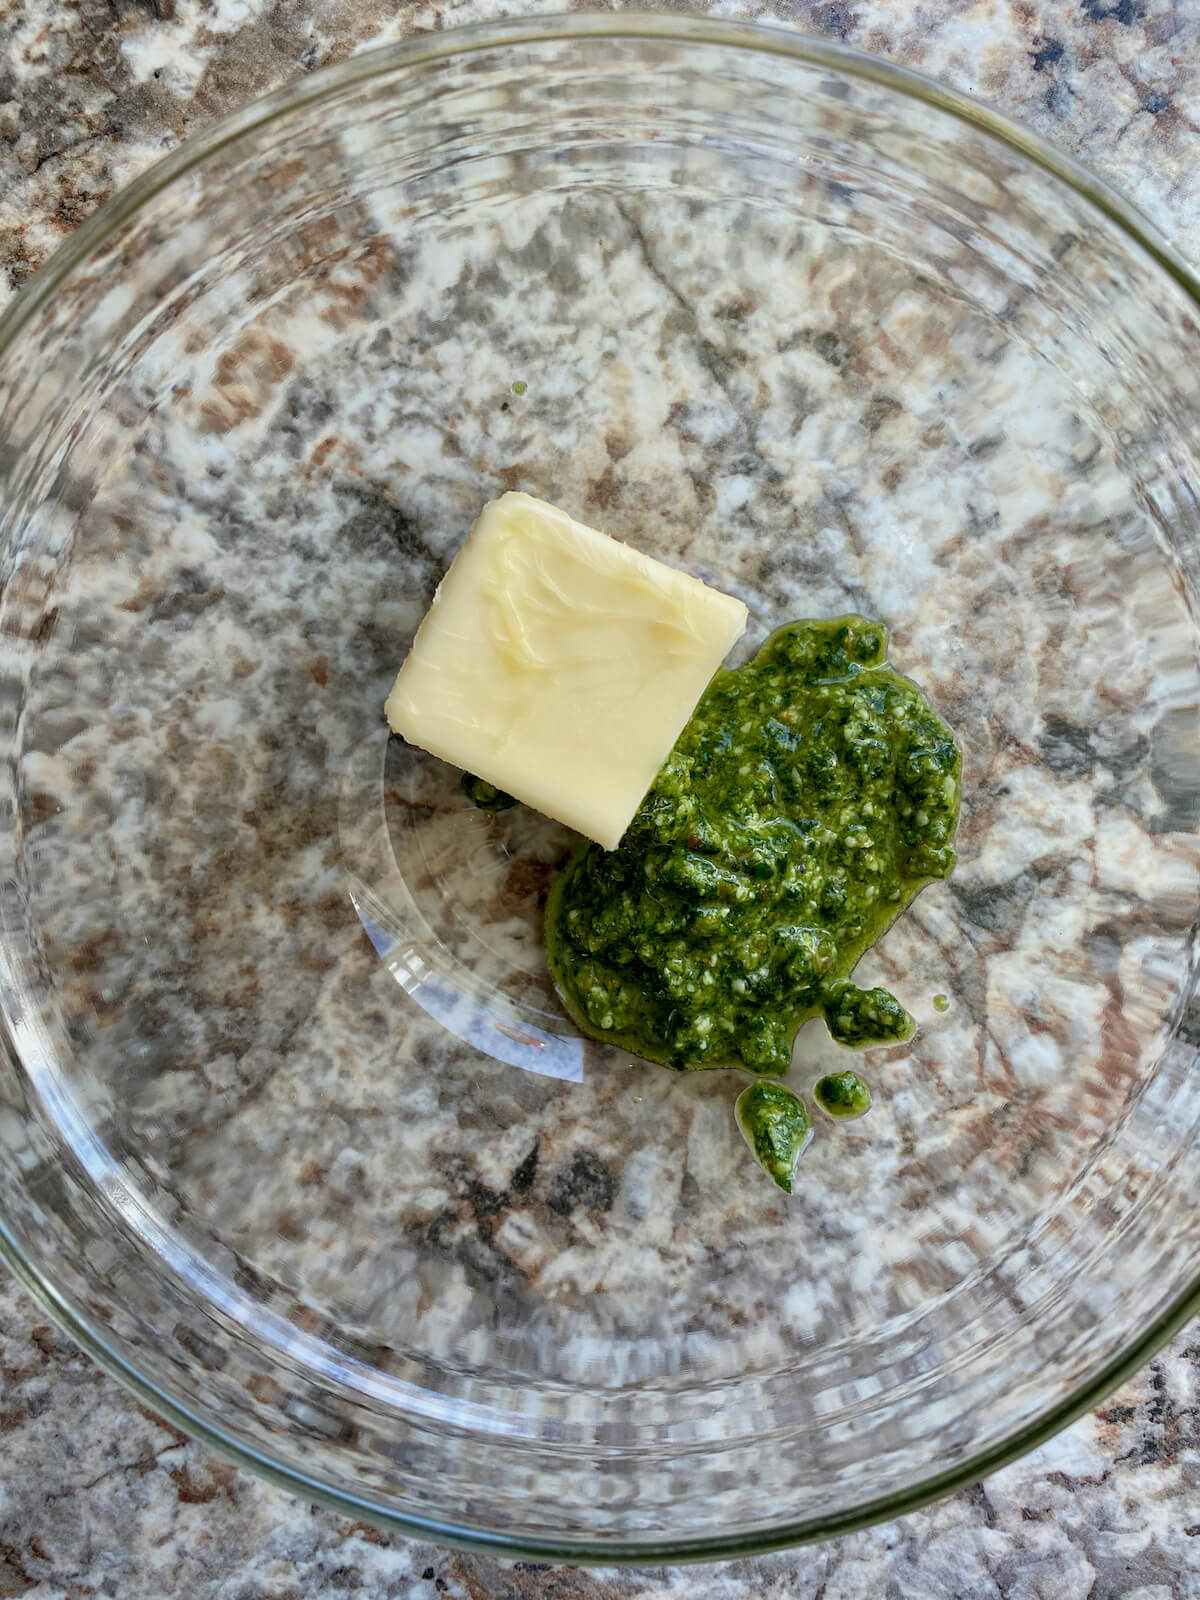 Butter and pesto in a glass mixing bowl.